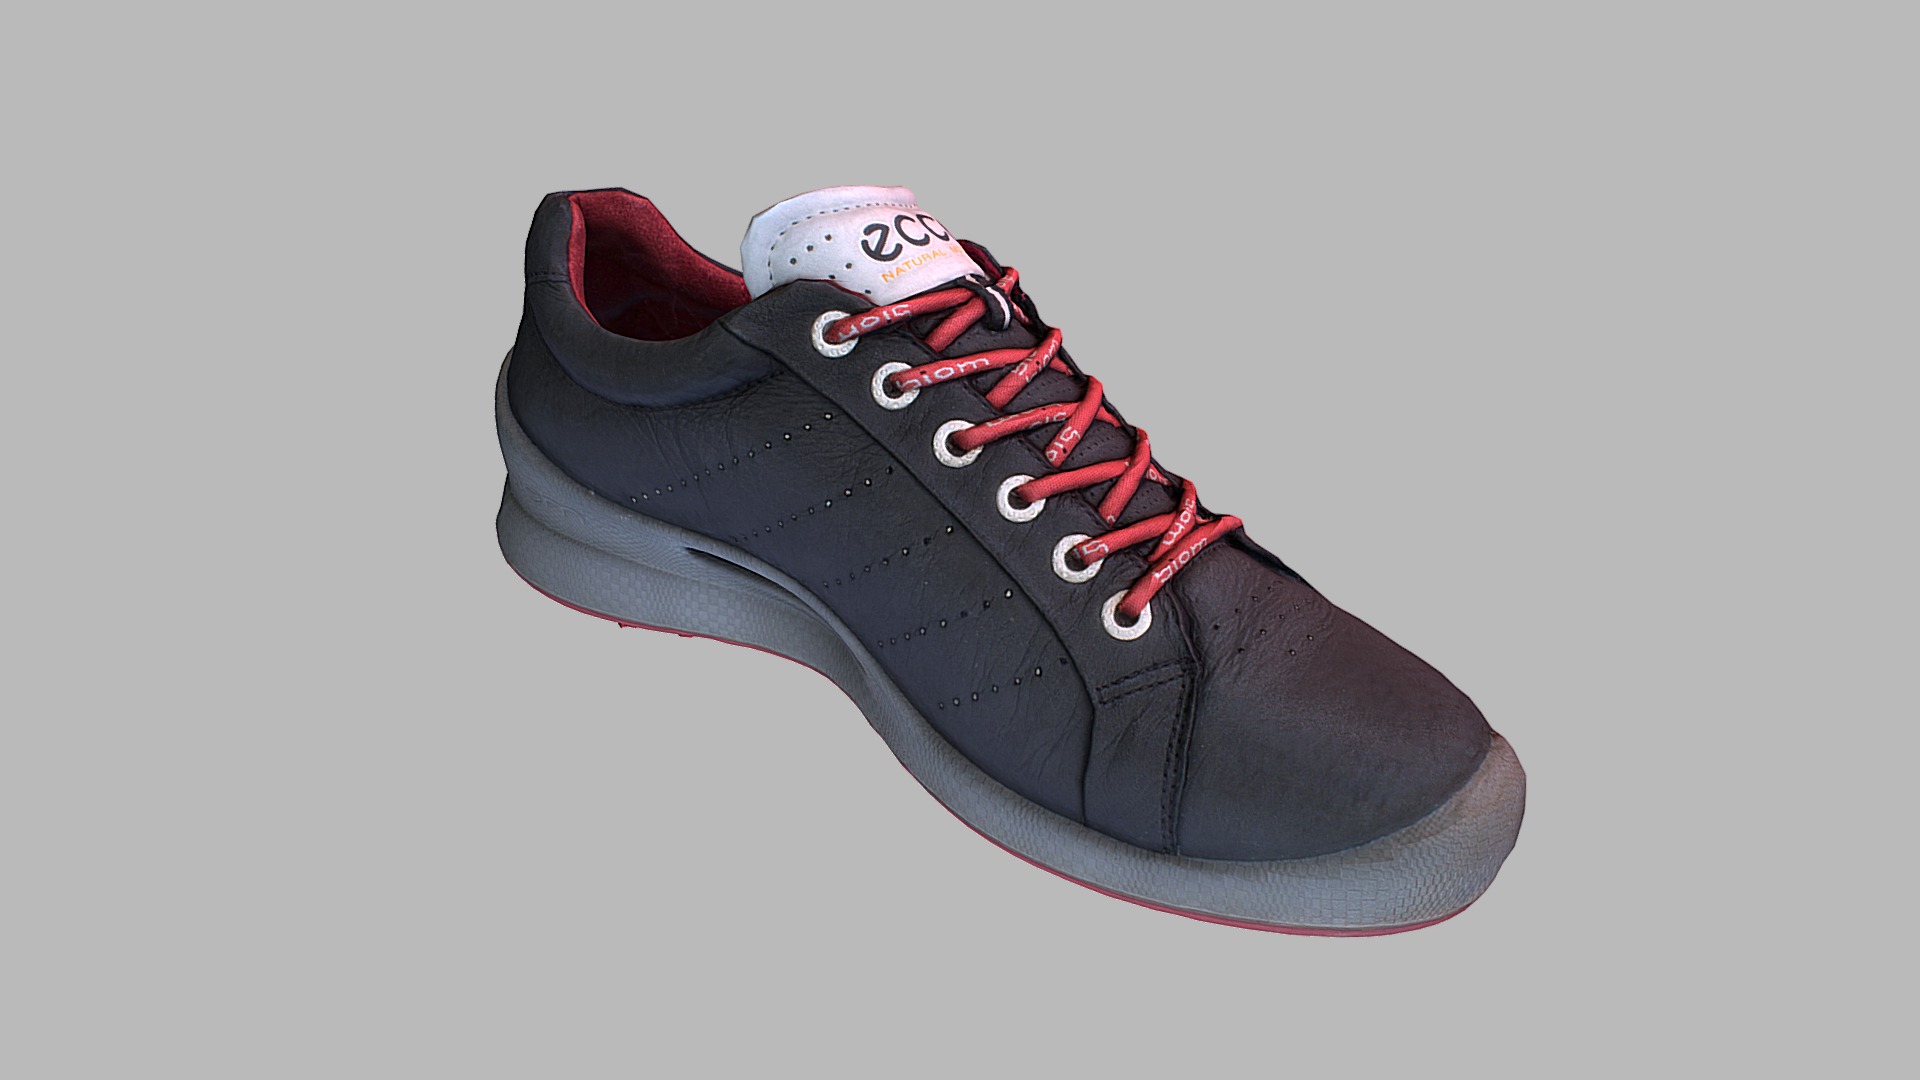 3D model Shoe low poly 3D model - This is a 3D model of the Shoe low poly 3D model. The 3D model is about a black and red shoe.